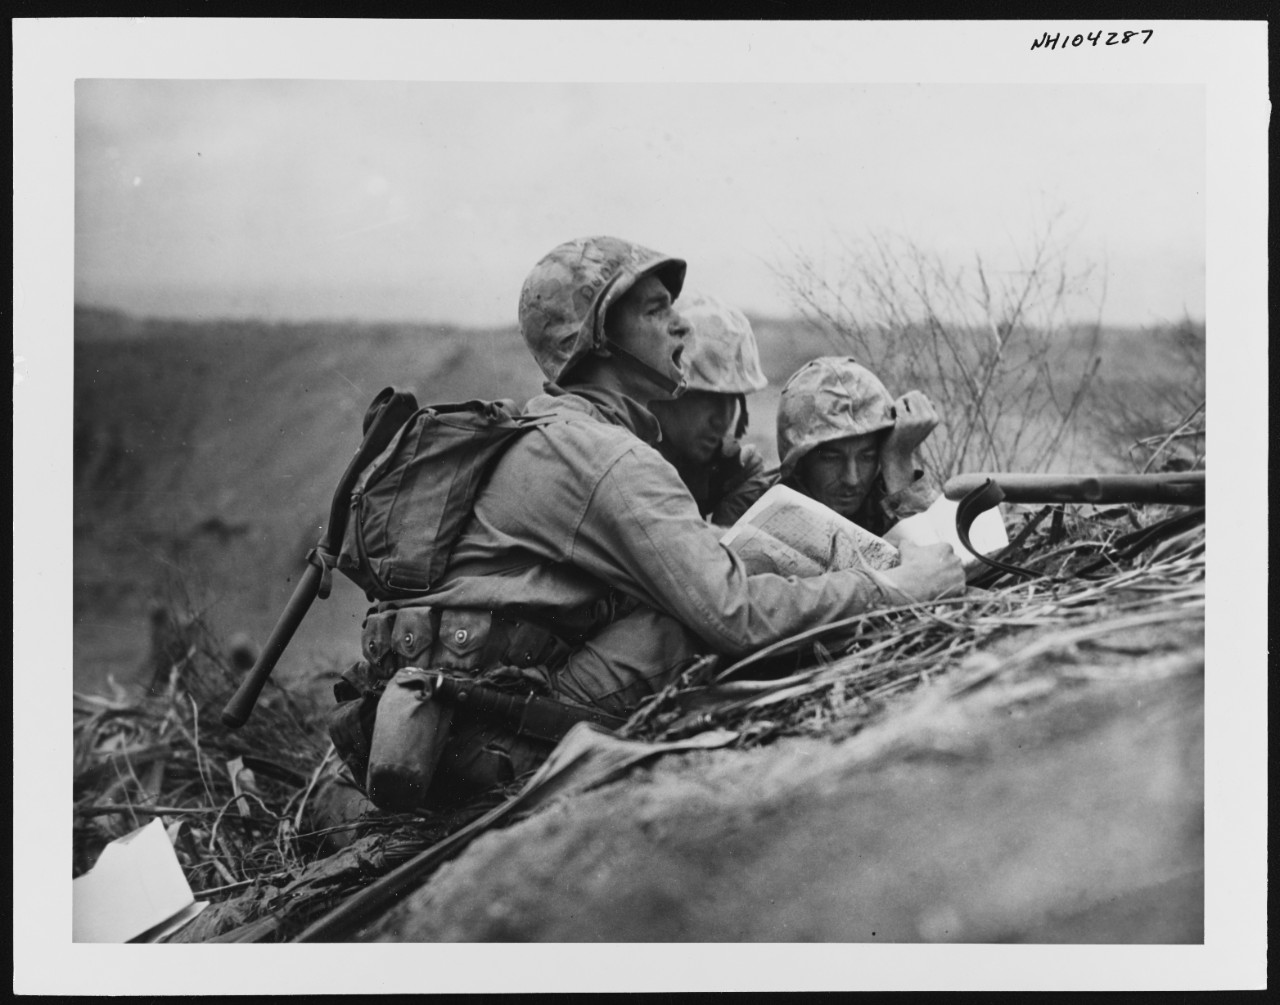 Photo #: NH 104287  &quot;Observers who spotted machine gun nest find its location on map so they can send information to artillery or mortars to wipe out the position.&quot;